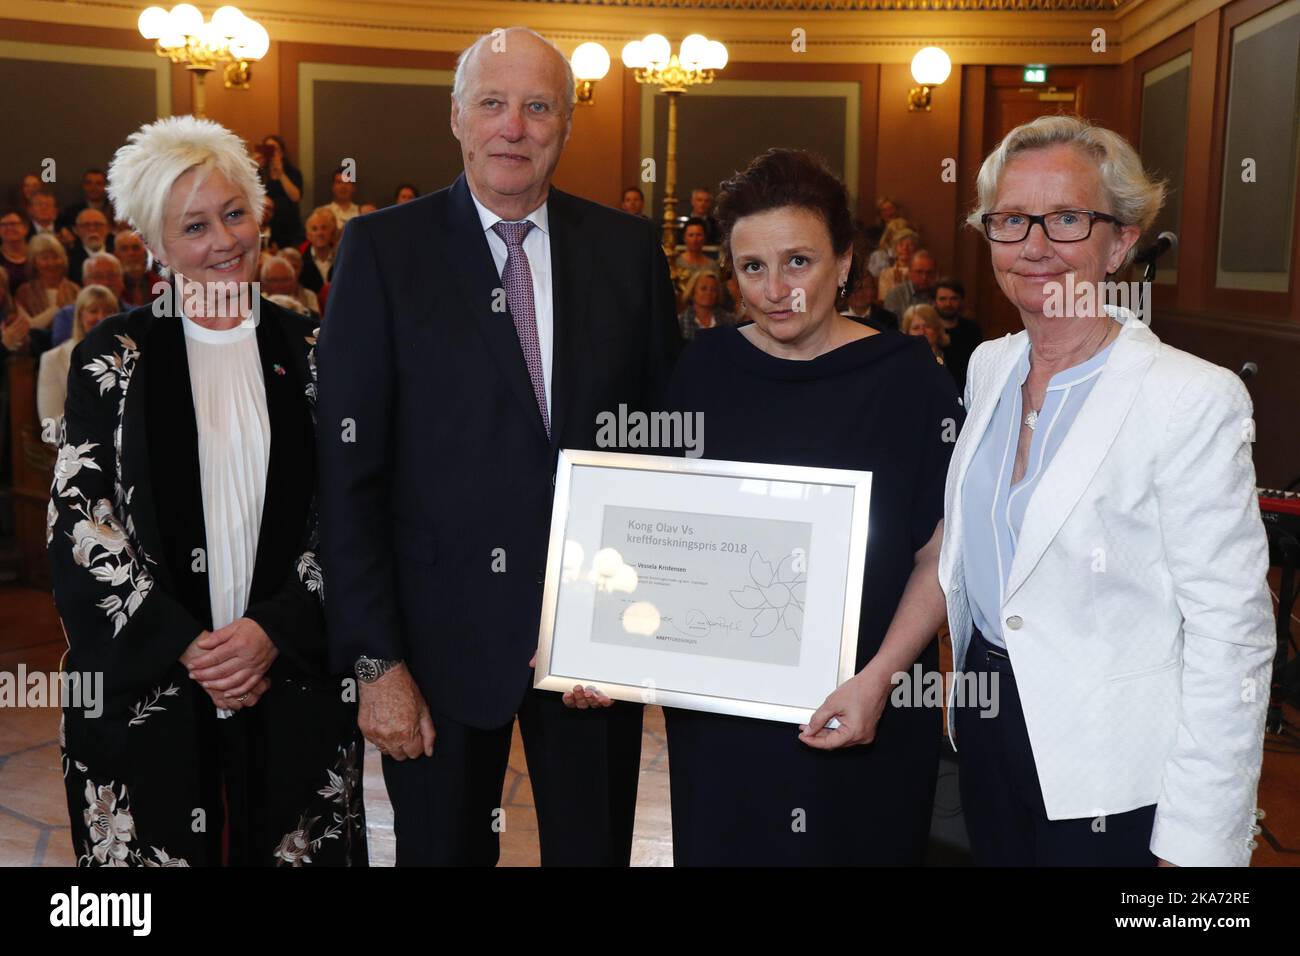 Oslo, Norway 20180416. King Harald presents Professor Vessela Kristensen (UiO) (2nd right) Kong Olav Vs Cancer Research Prize for 2018 at the University's Old Hall Monday. The Cancer Research Prize is awarded by the Cancer Society to researchers who have distinguished themselves through years of efforts for a better life for many people. Photo: Heiko Junge / NTB scanpi Stock Photo